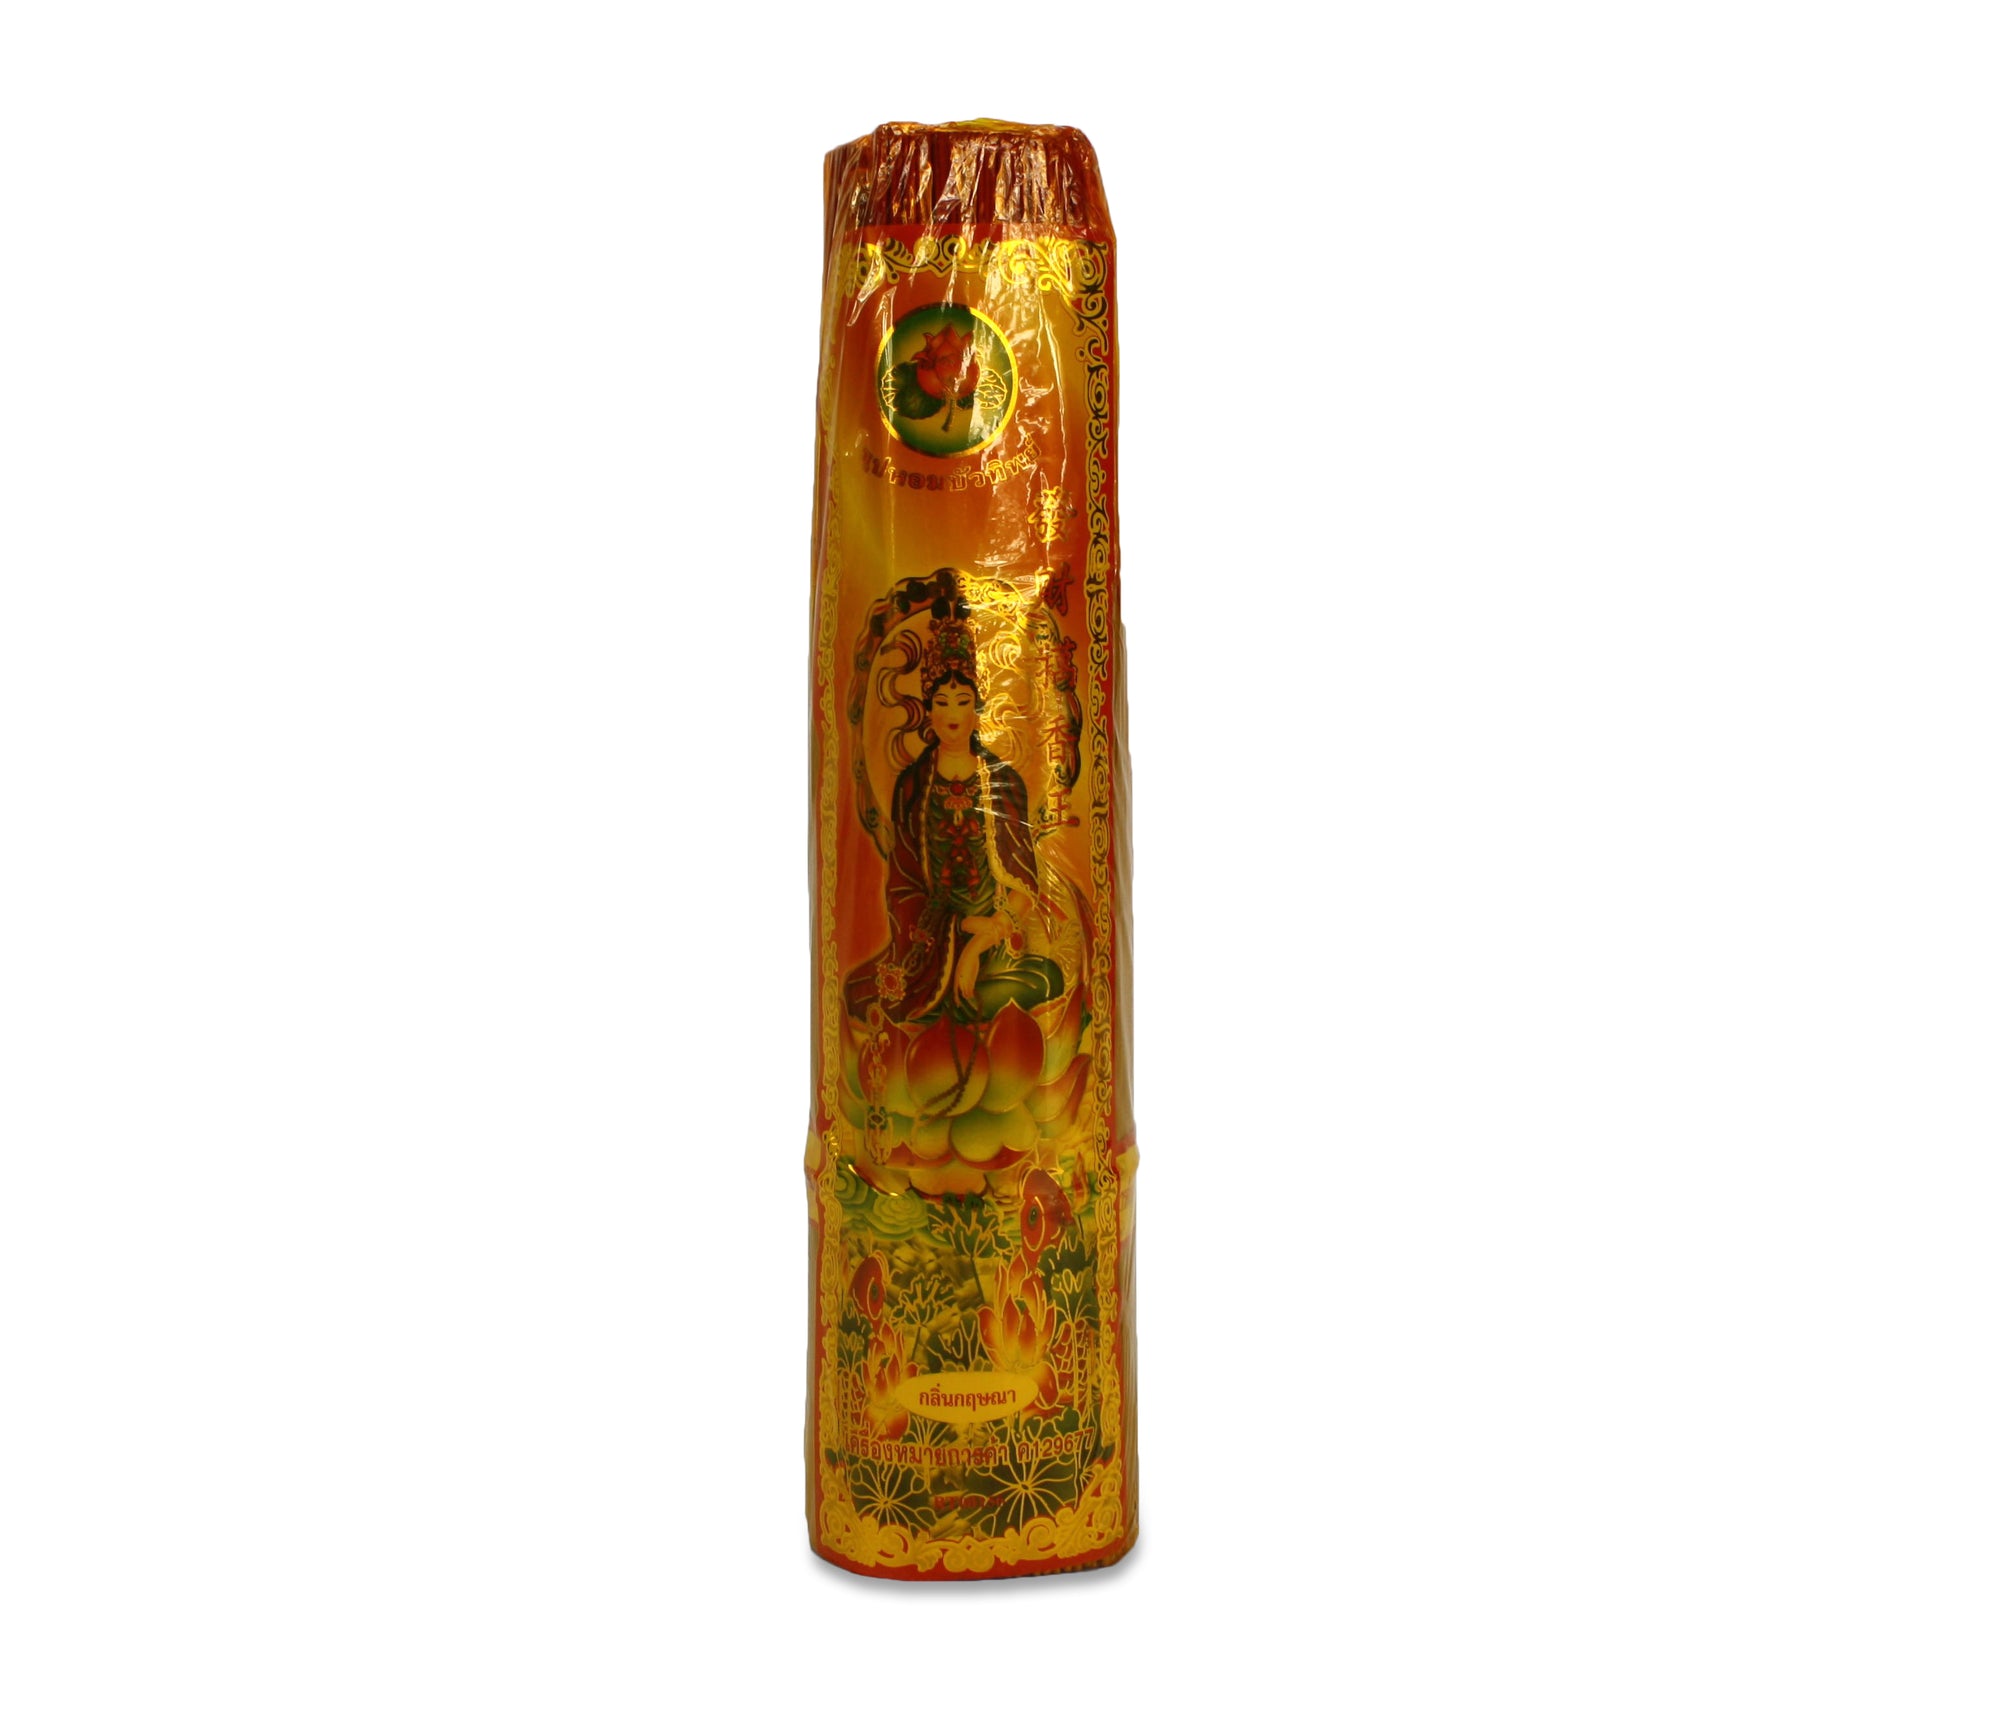 Authentic Temple Incense - Fragranced, Guanyin - large 650g pack. - farangshop-co